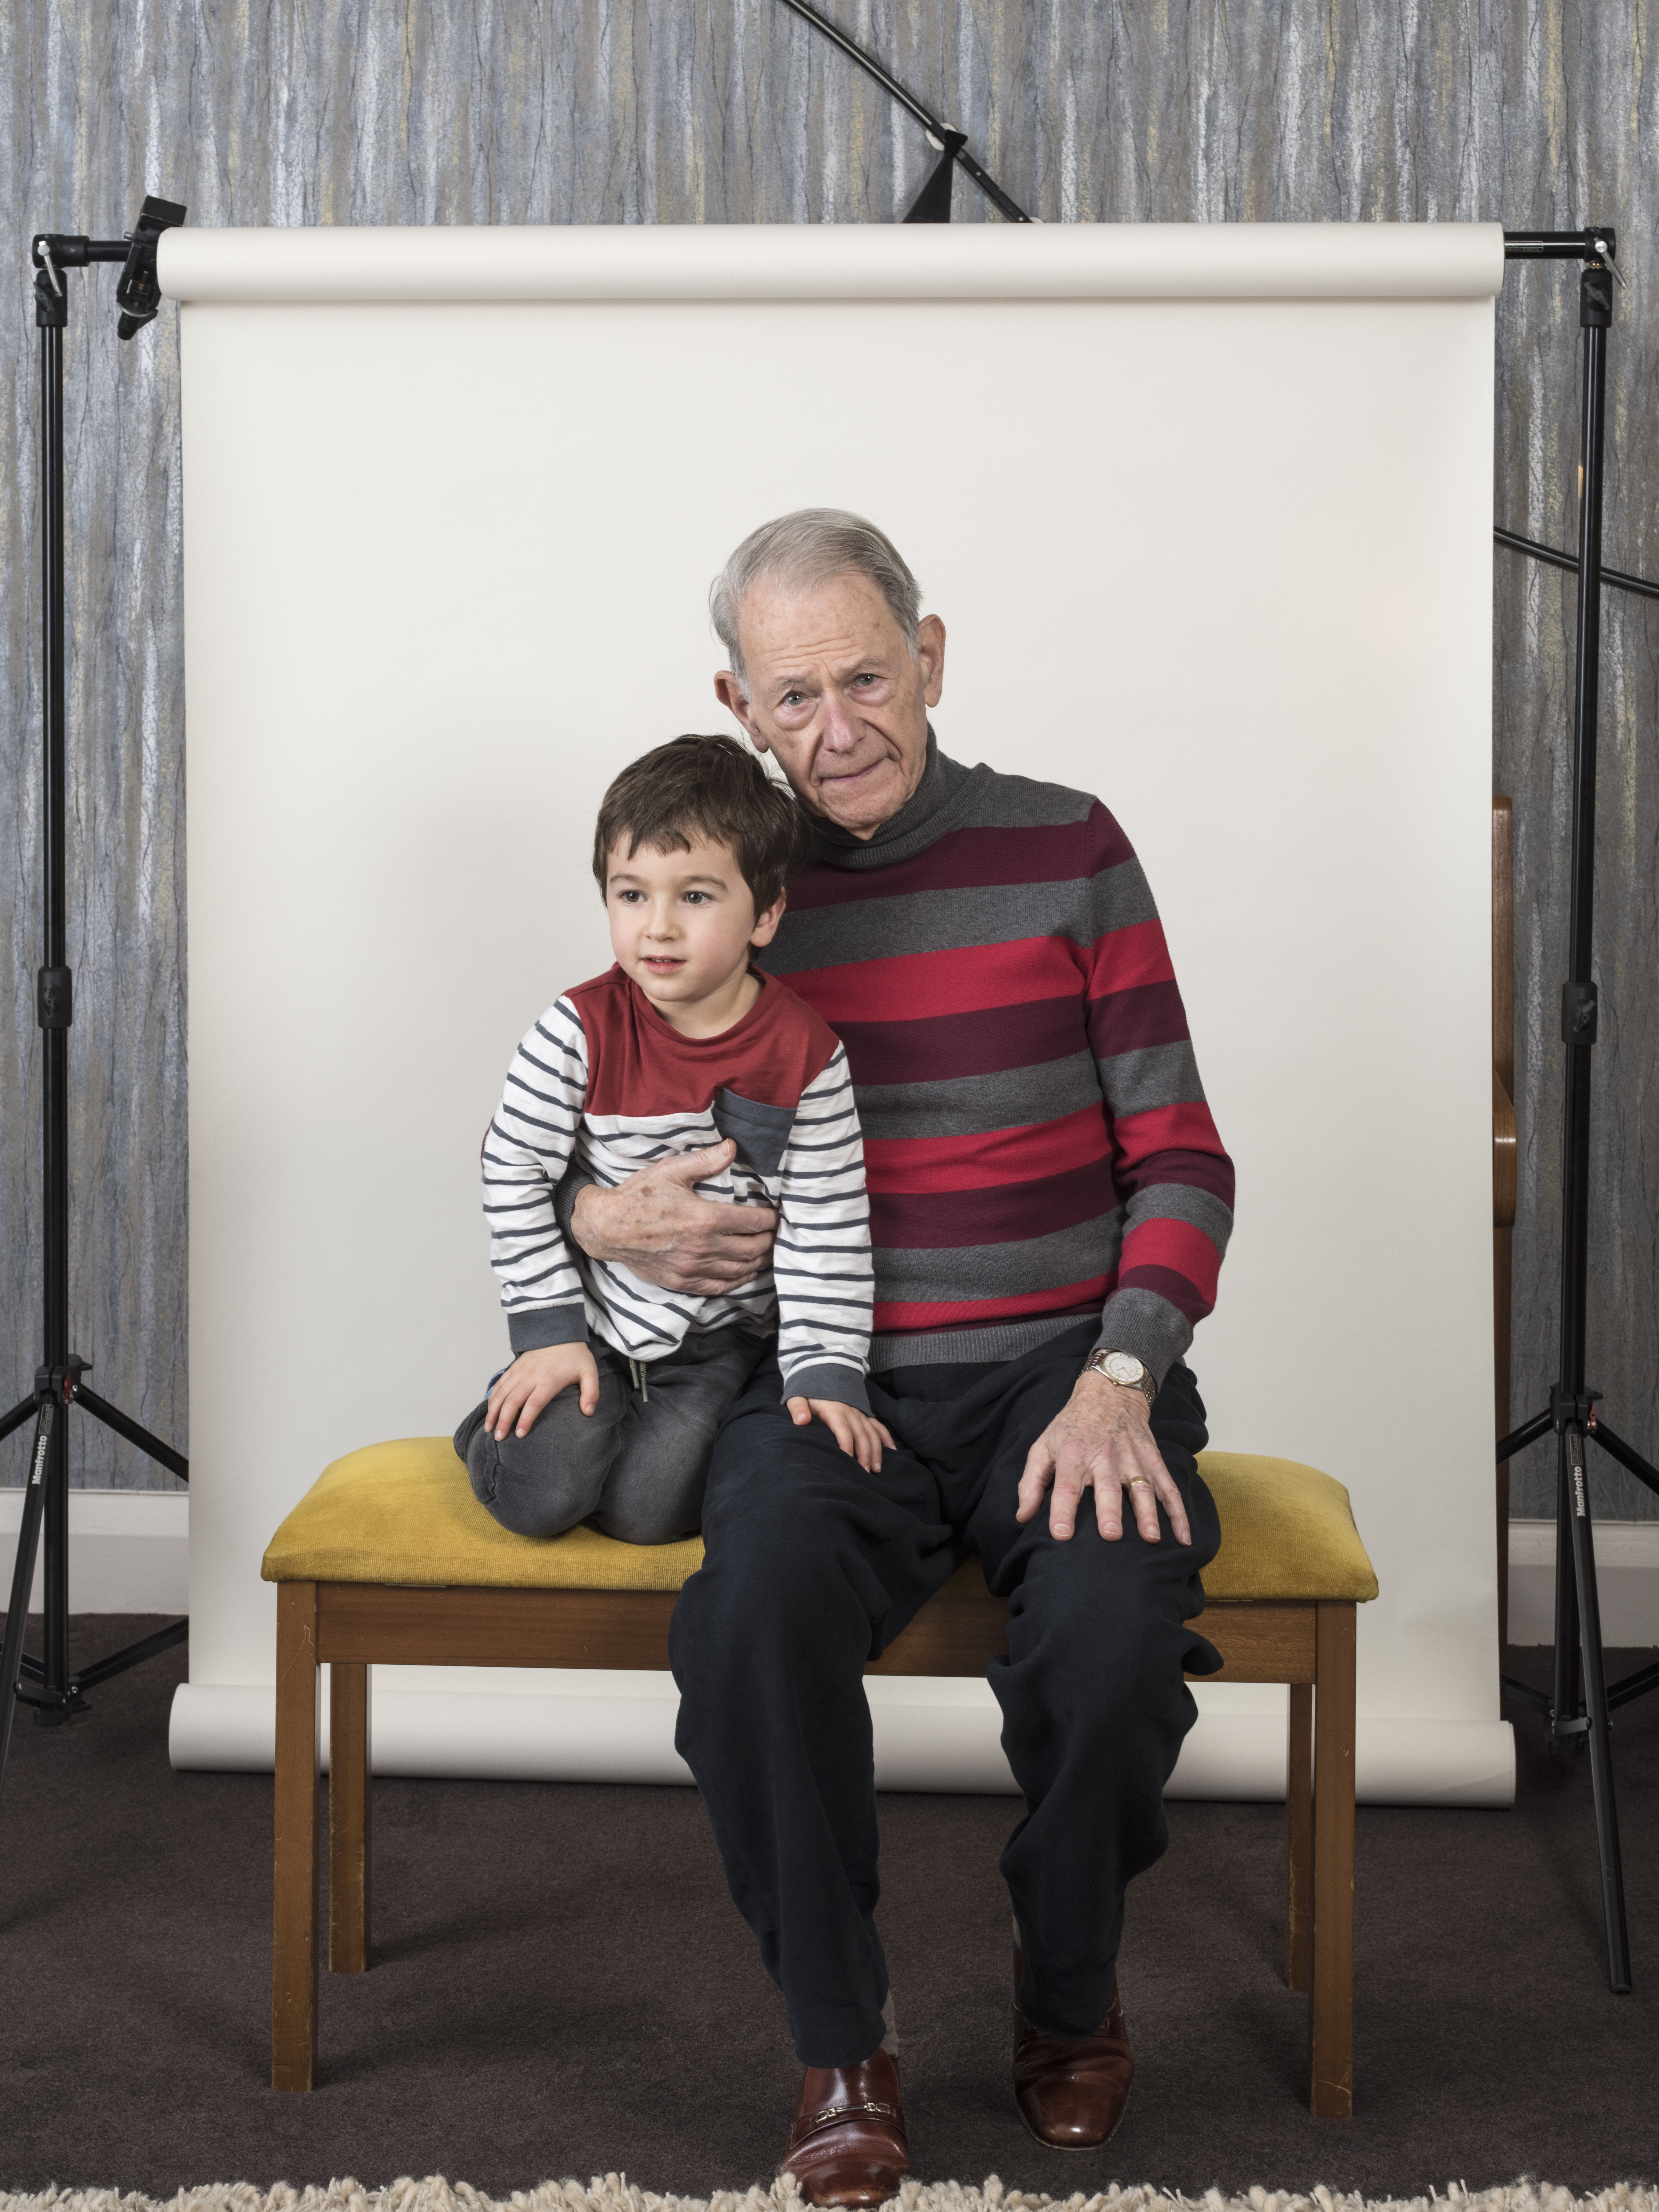 John Hajdu, aged 82, who survived the Budapest Ghetto, pictured with his grandson Zac, aged four